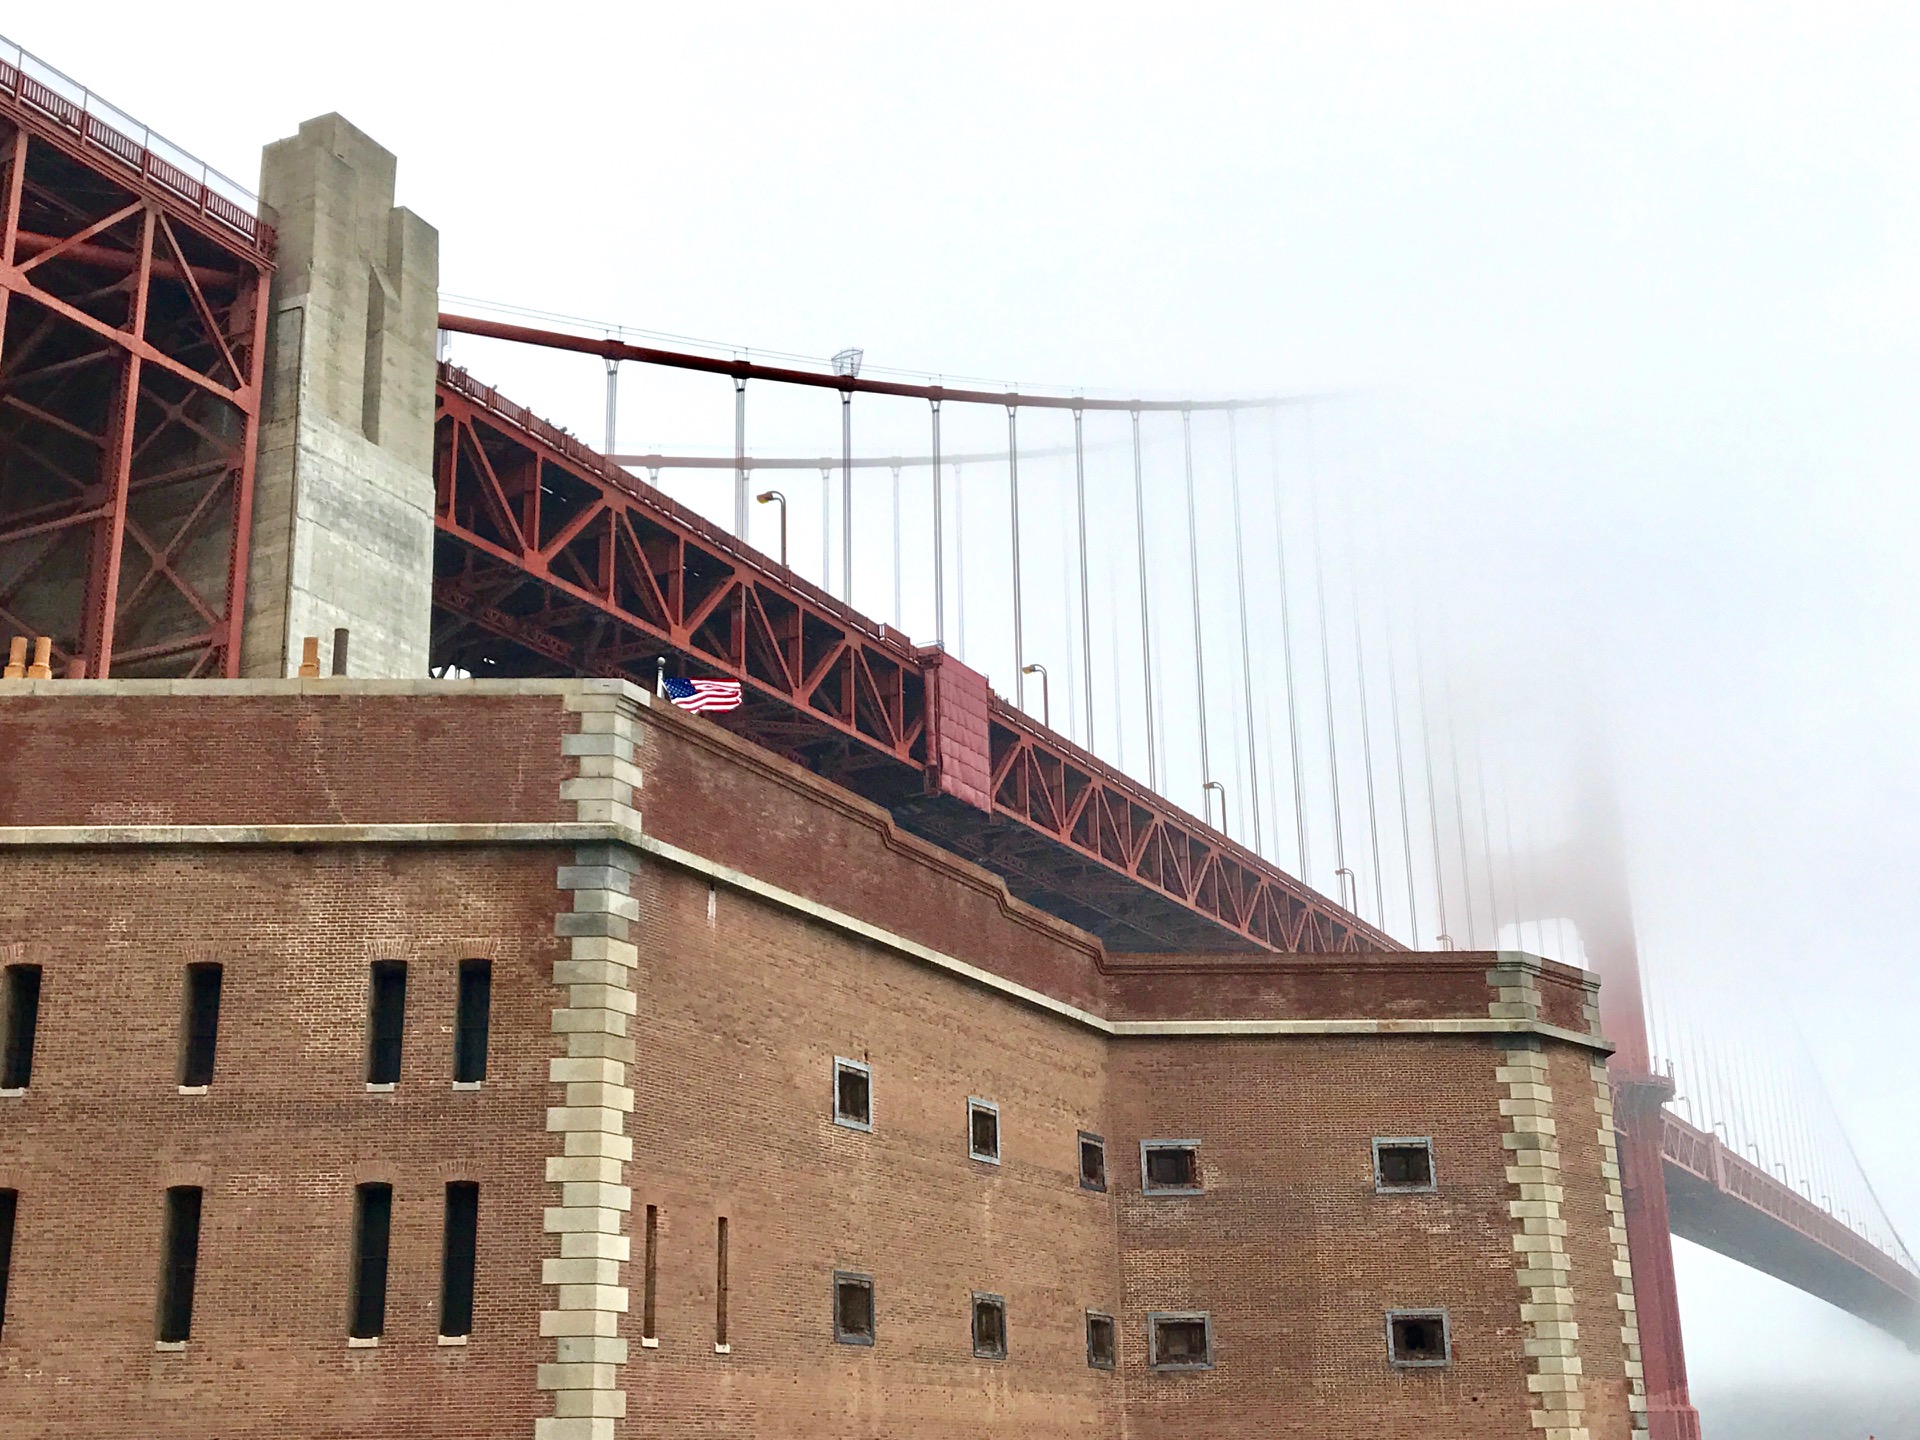 Looking up at the Golden Gate Bridge near Fort Point